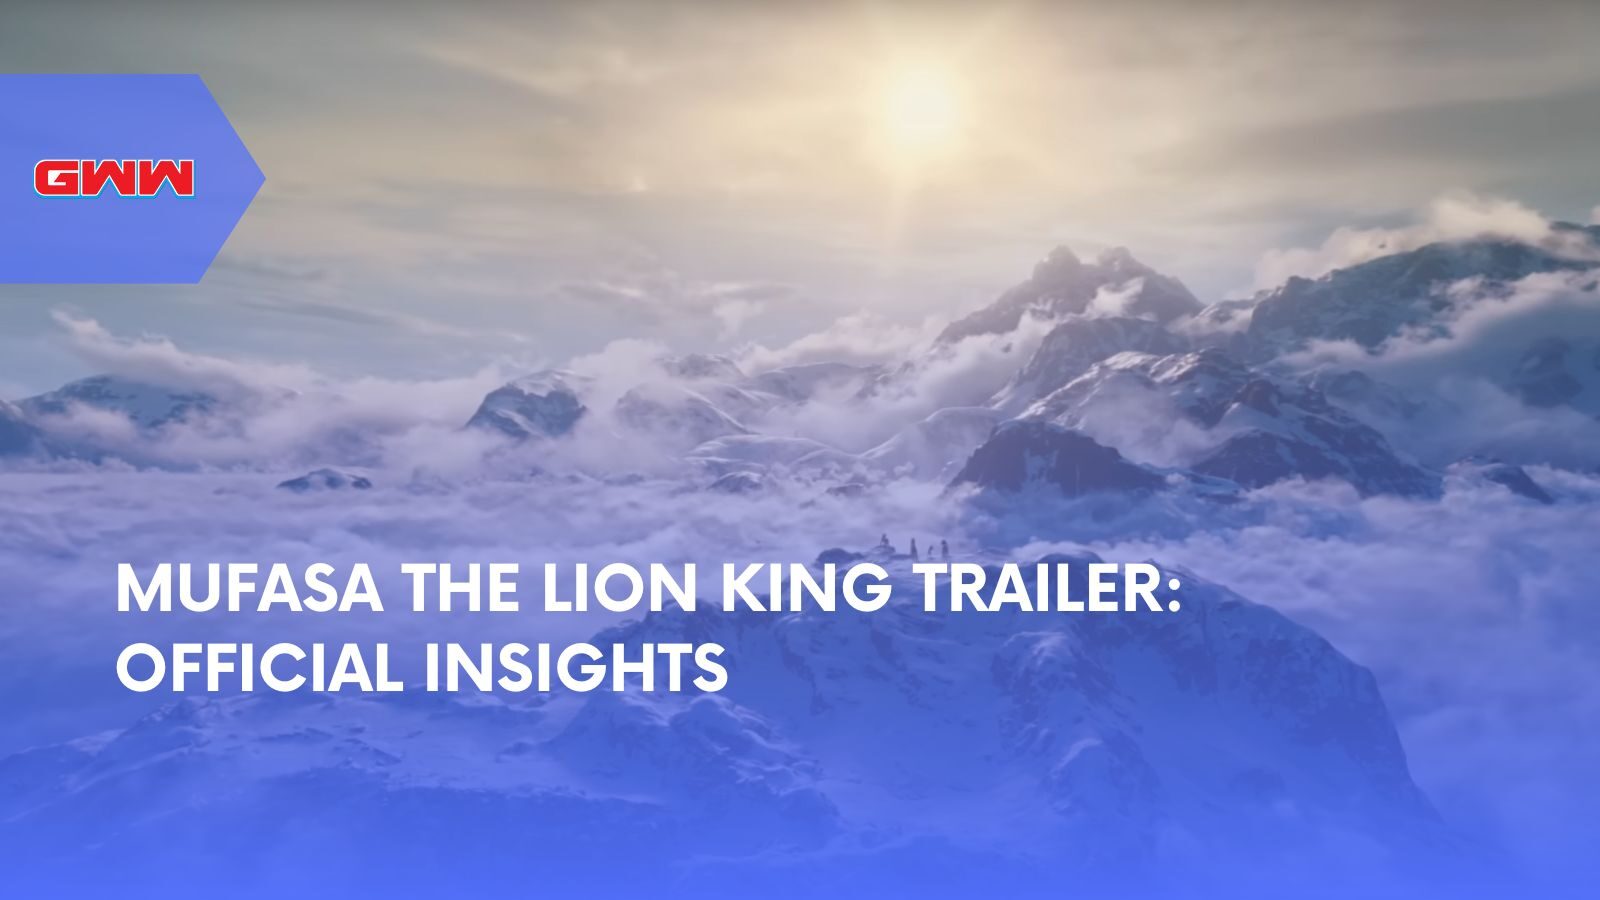 Mufasa The Lion King Trailer: Official Insights